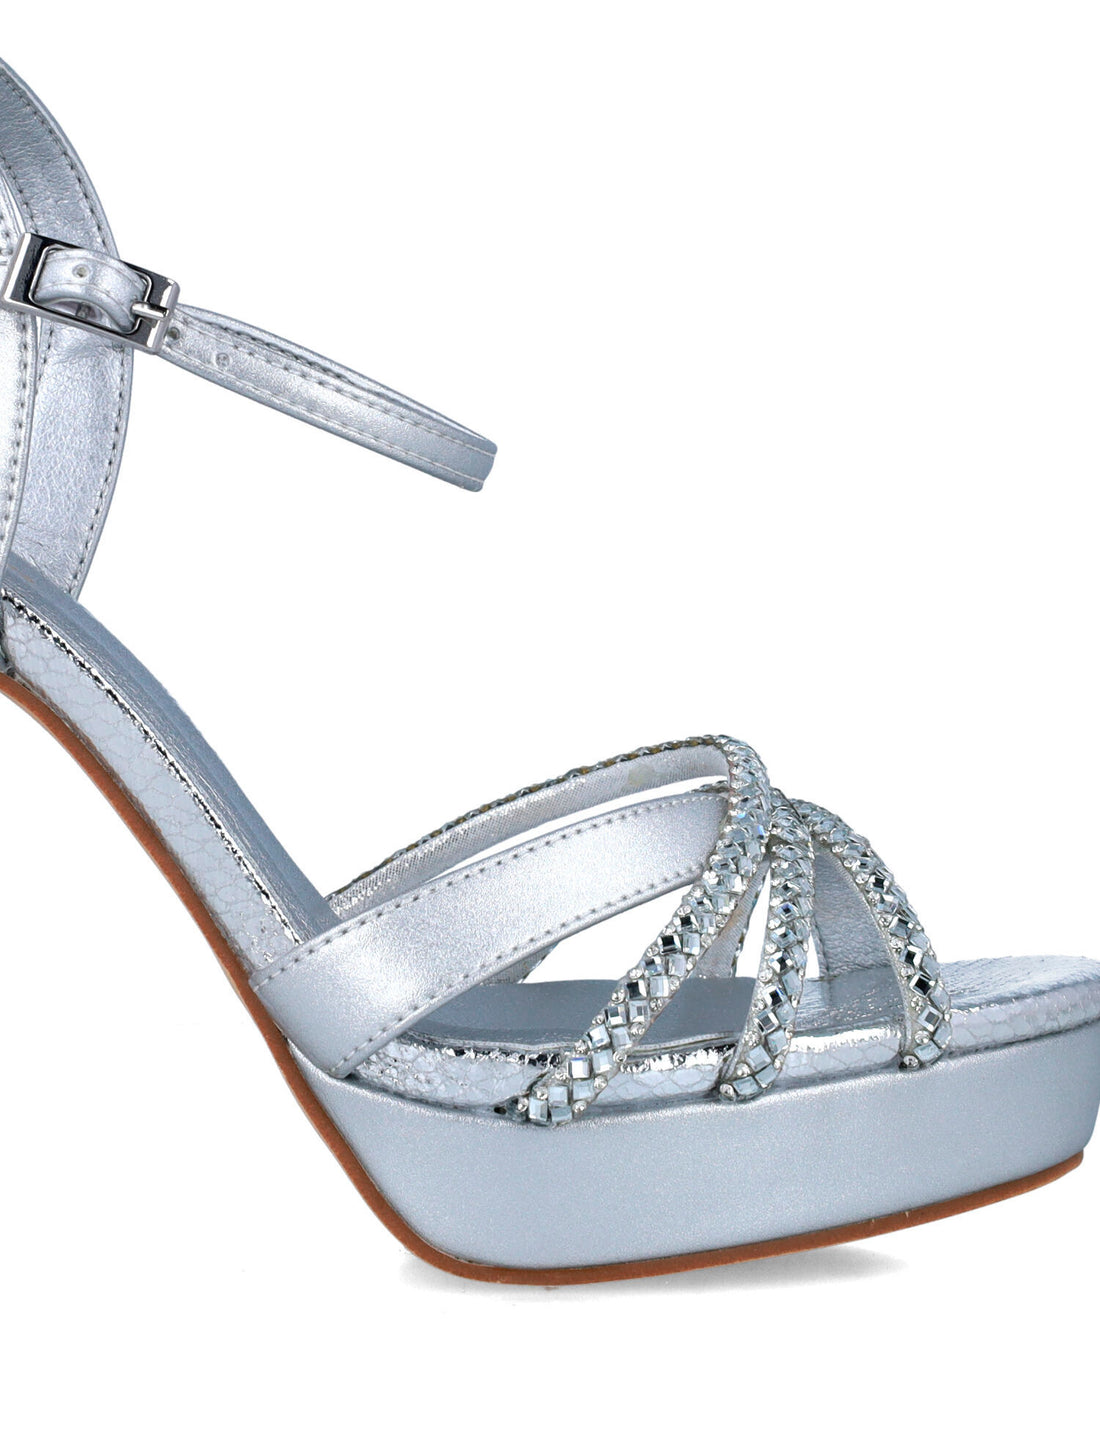 Silver High-Heel Sandals With Ankle Strap_25185_09_01